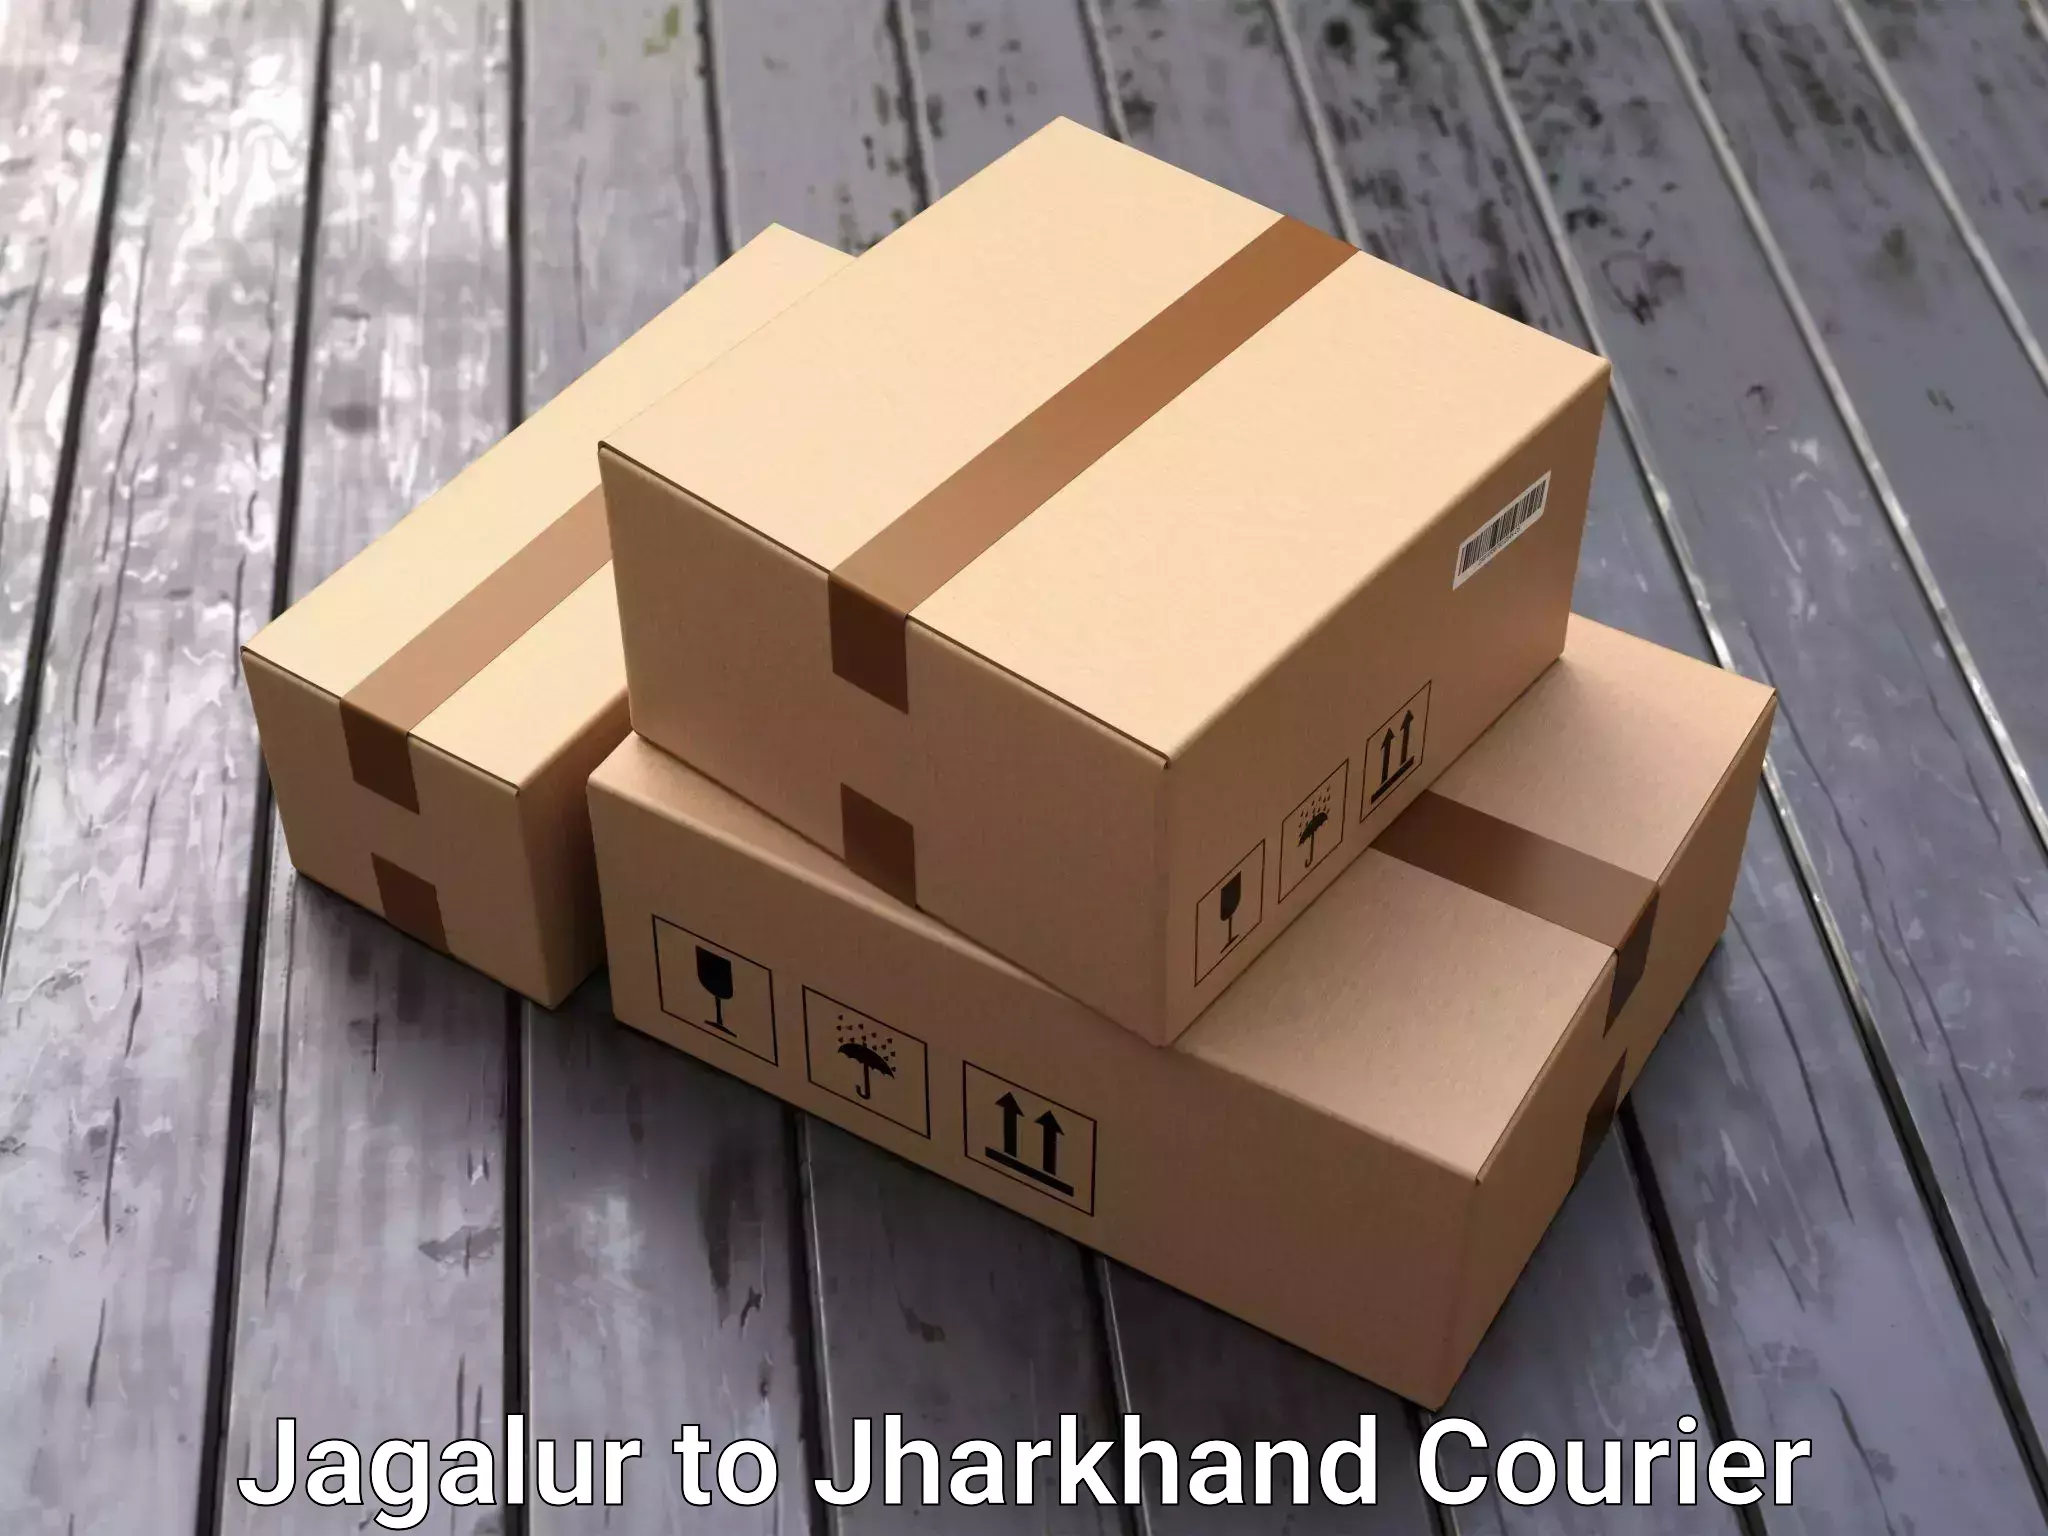 Specialized moving company Jagalur to Godabar Chatra